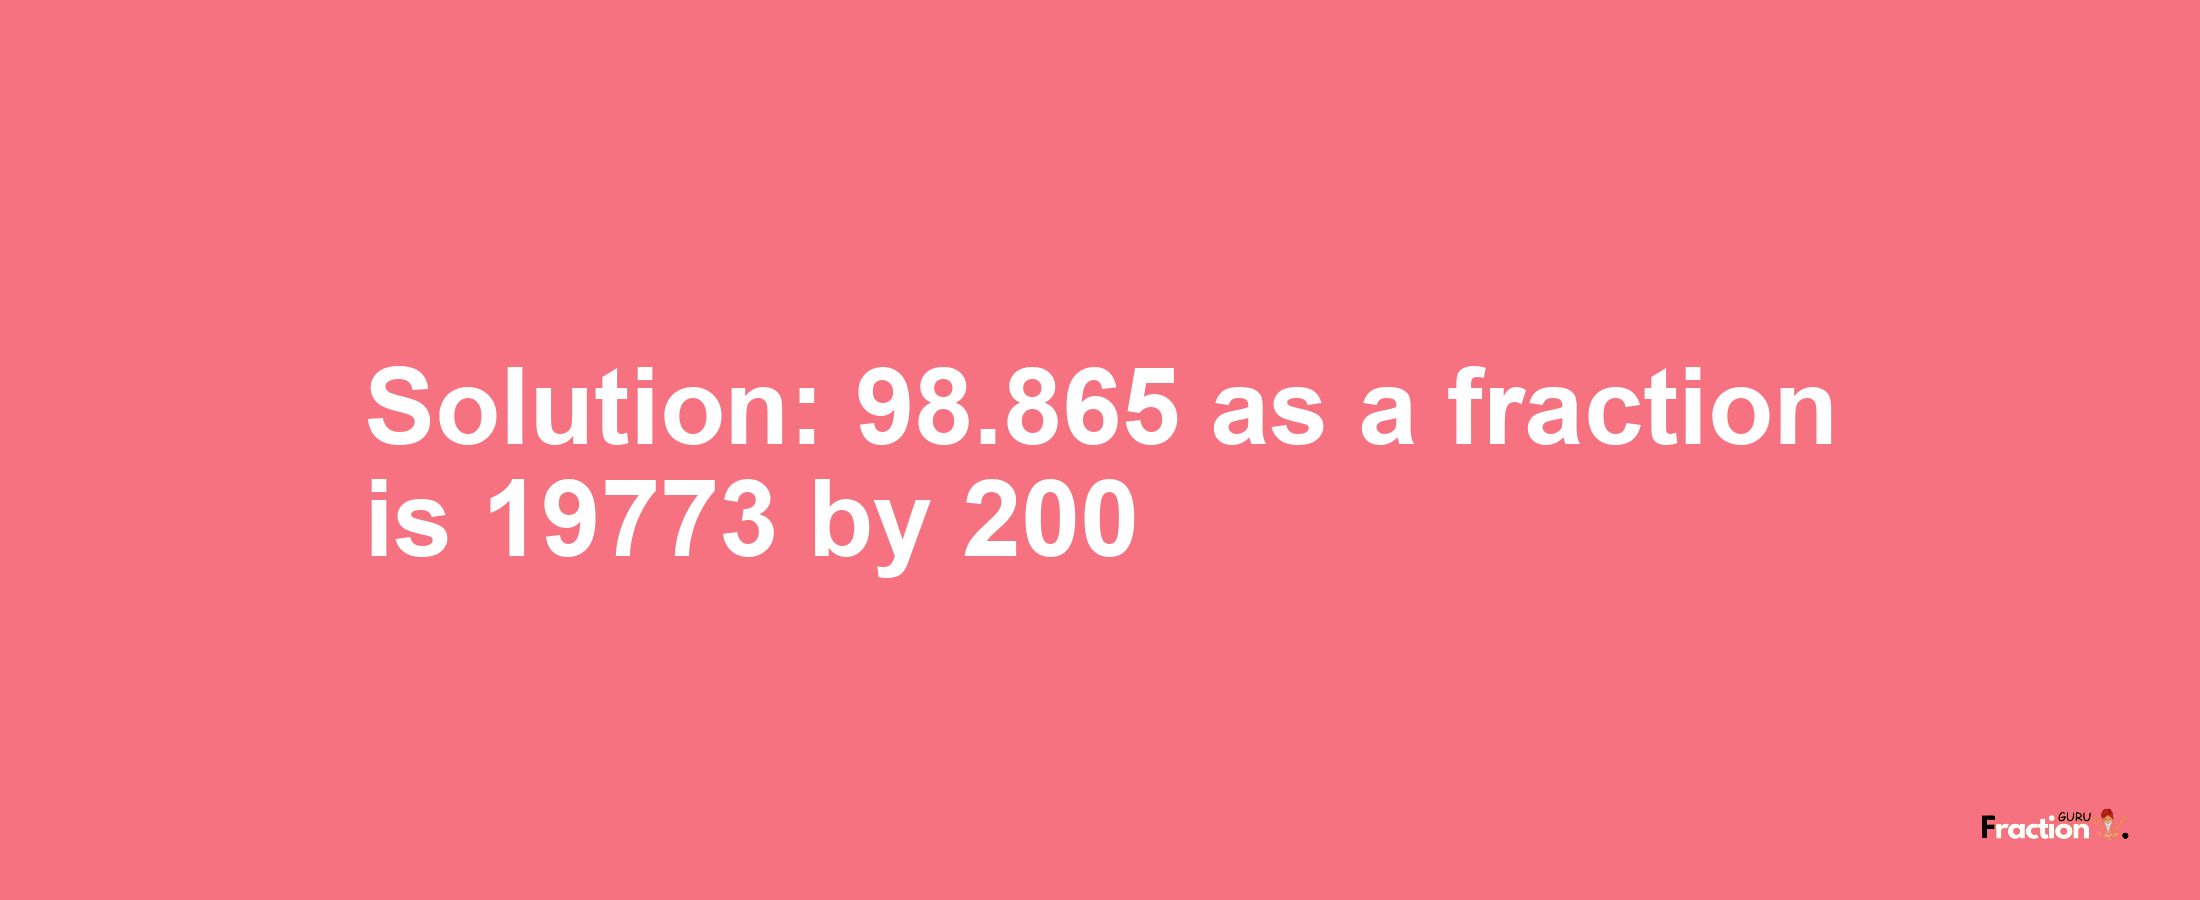 Solution:98.865 as a fraction is 19773/200